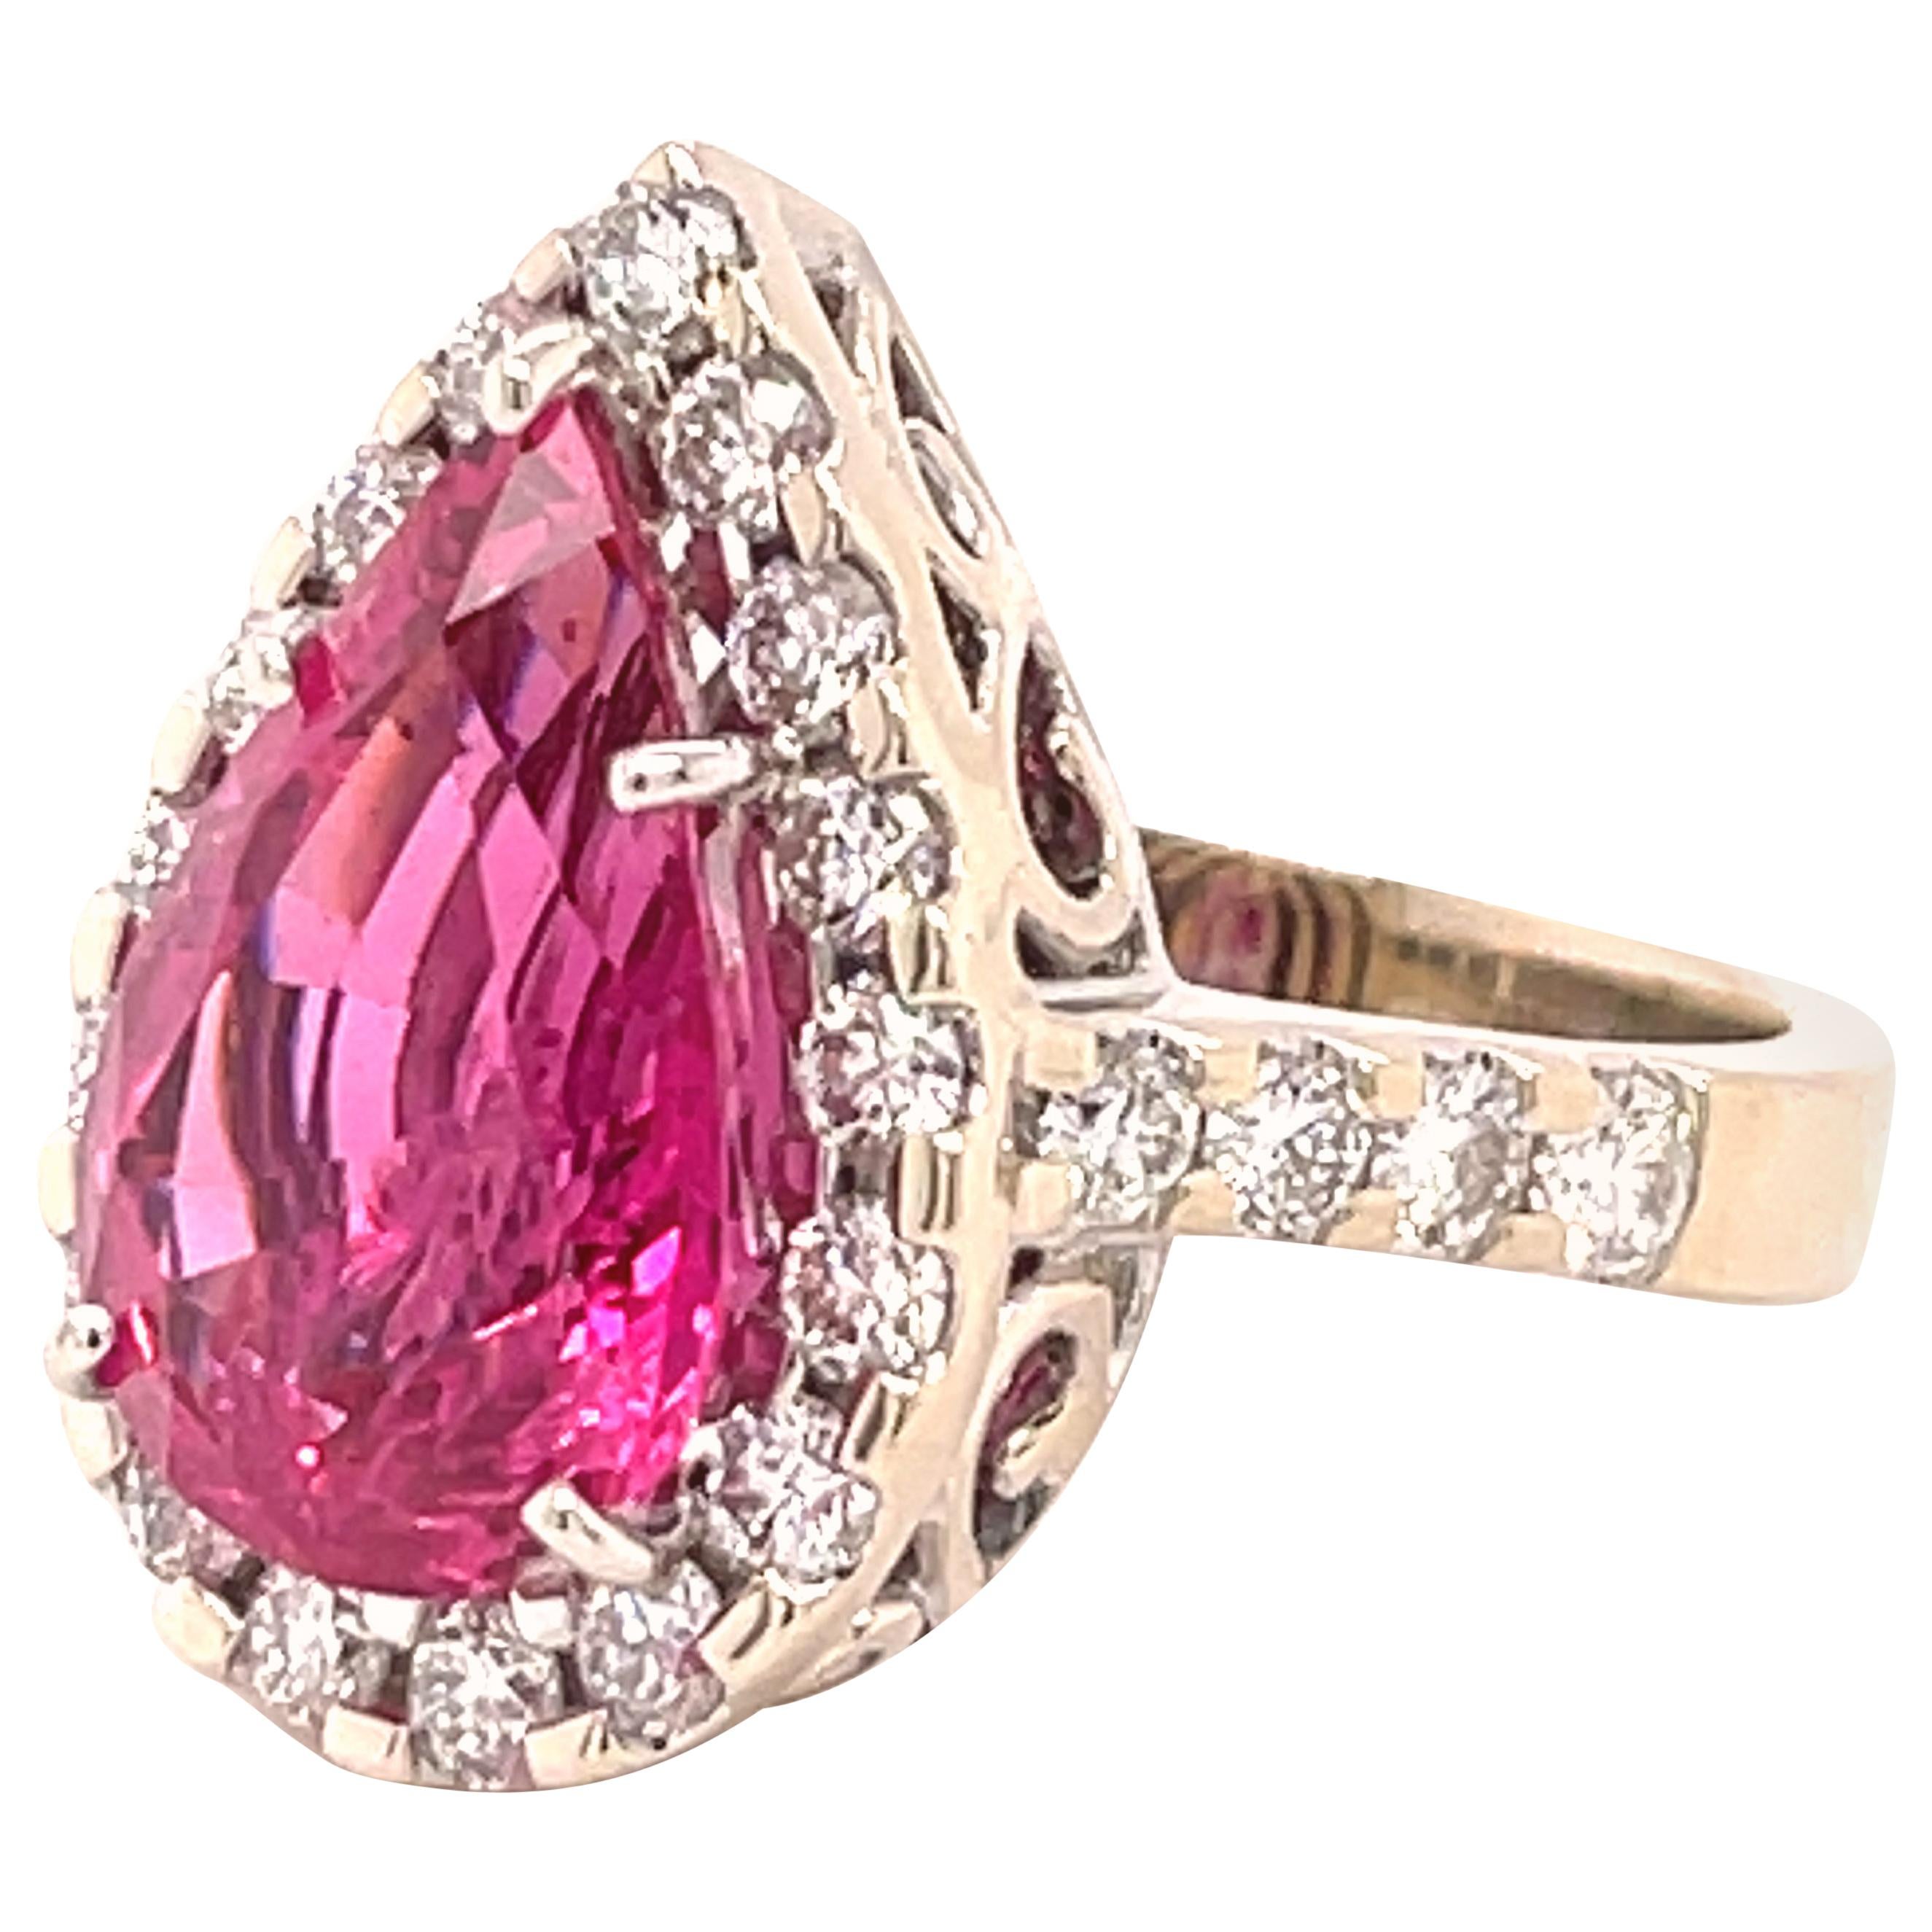 5.95 Carat Pink Spinel Diamond Gold Ring For Sale